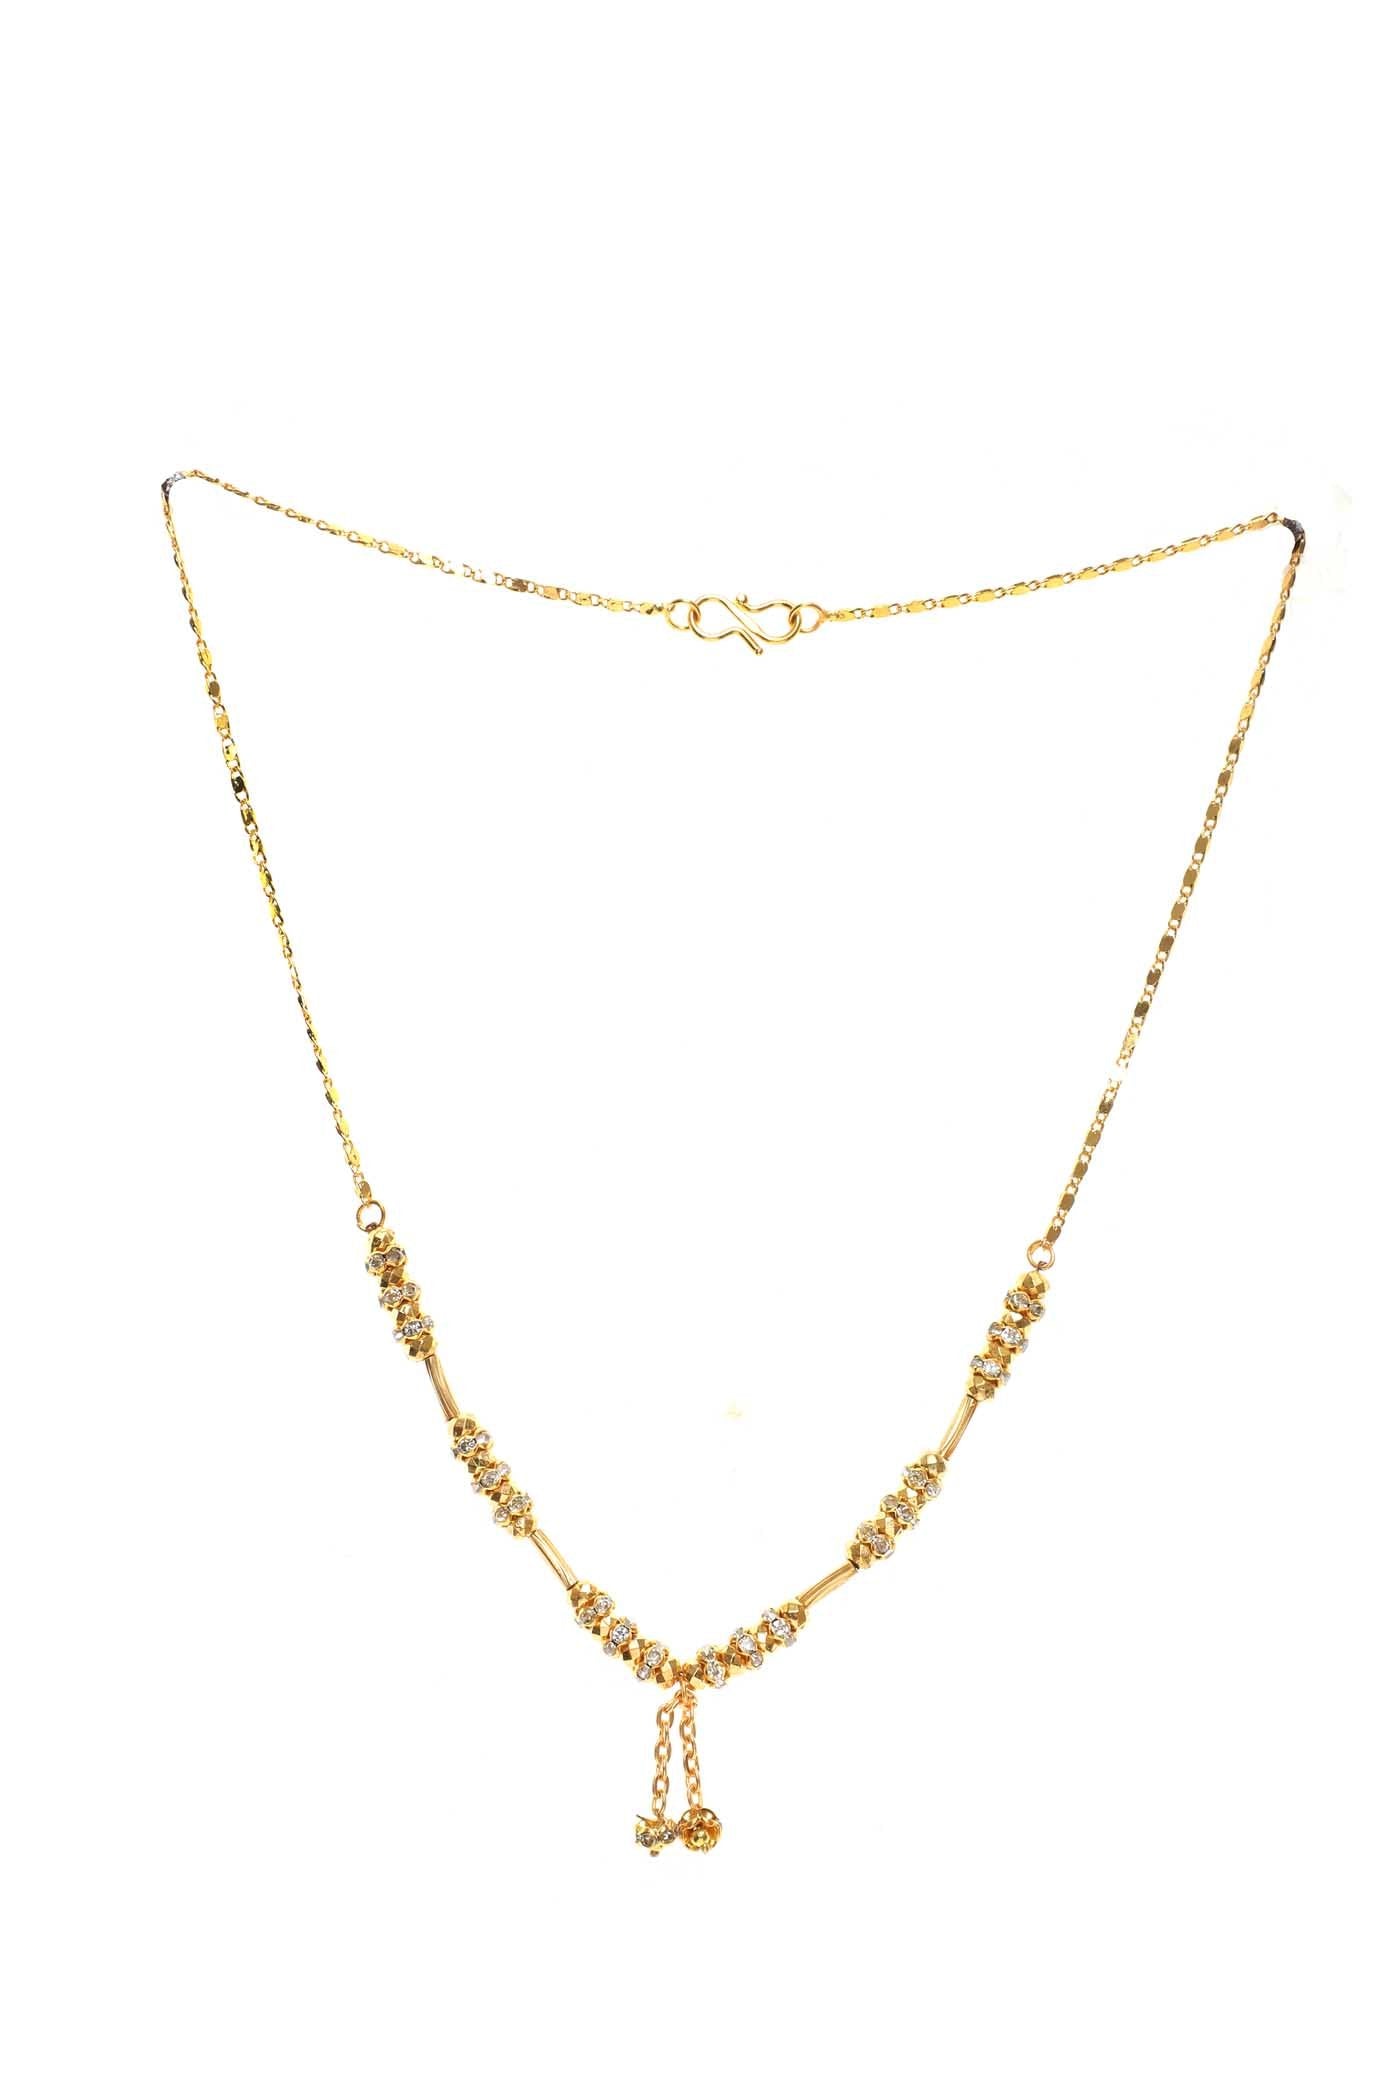 Indian Jewellery from Meira Jewellery:Chain Necklace,Trendy Golden Chain Necklace MJ-DOK-HD-09AG